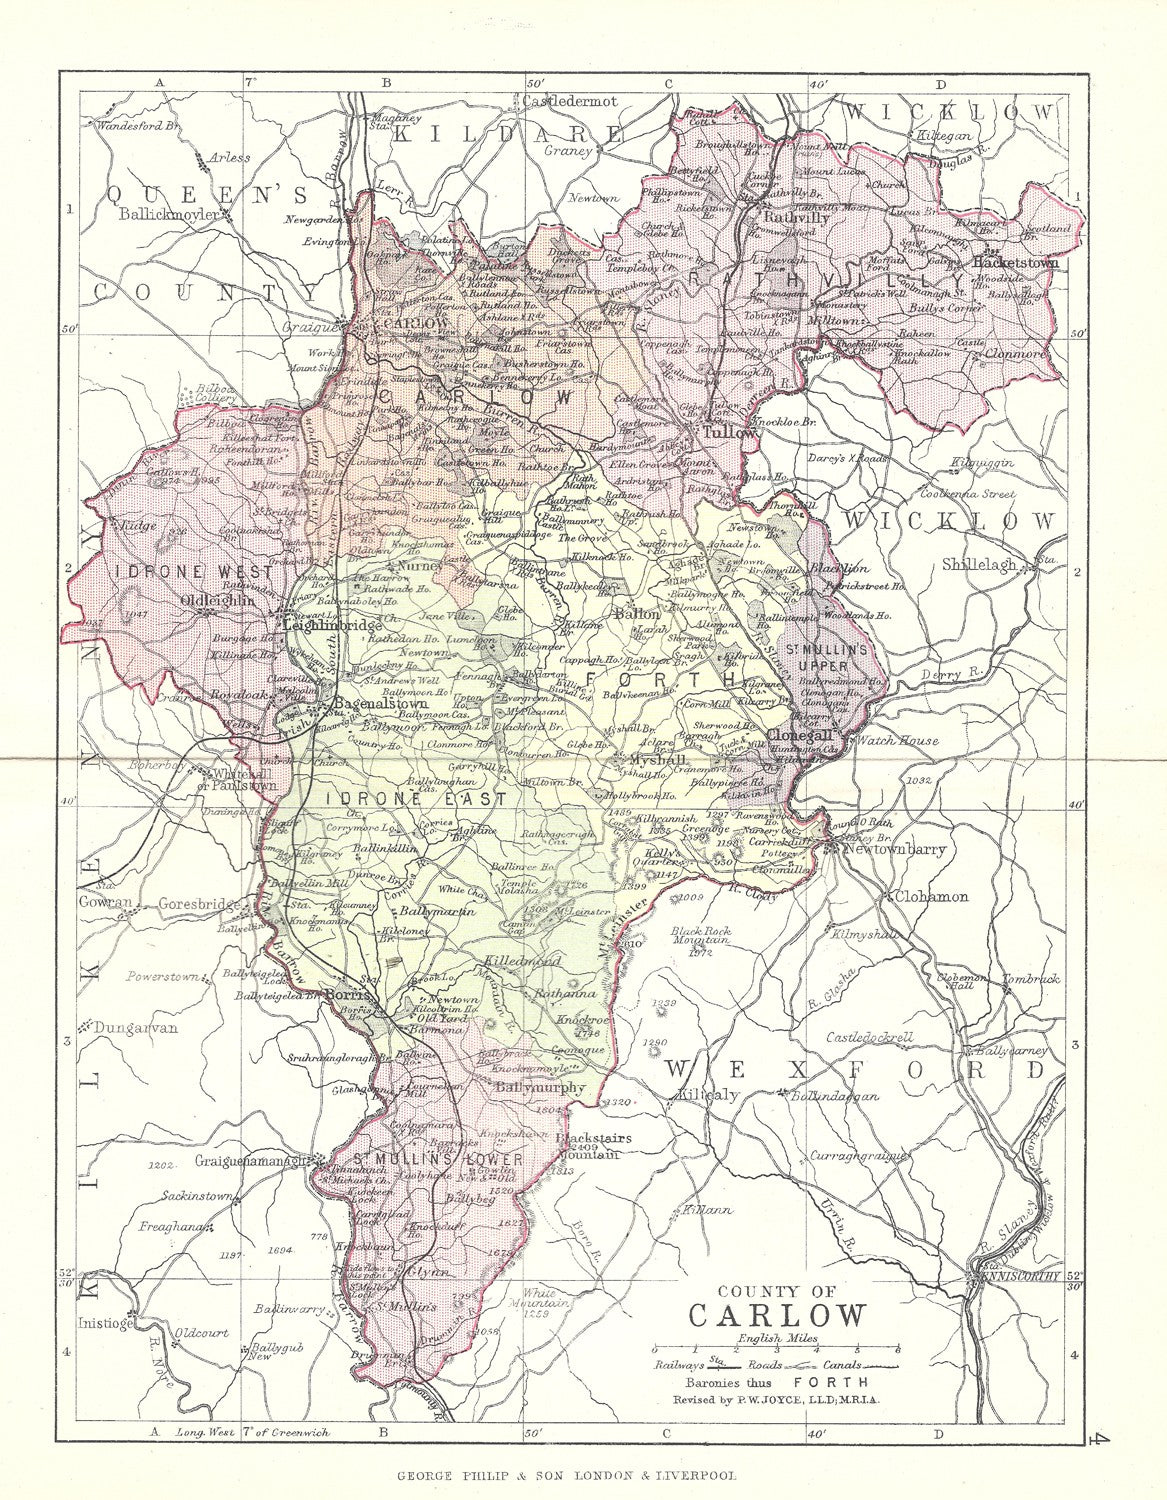 Carlow County Ireland antique map 1890